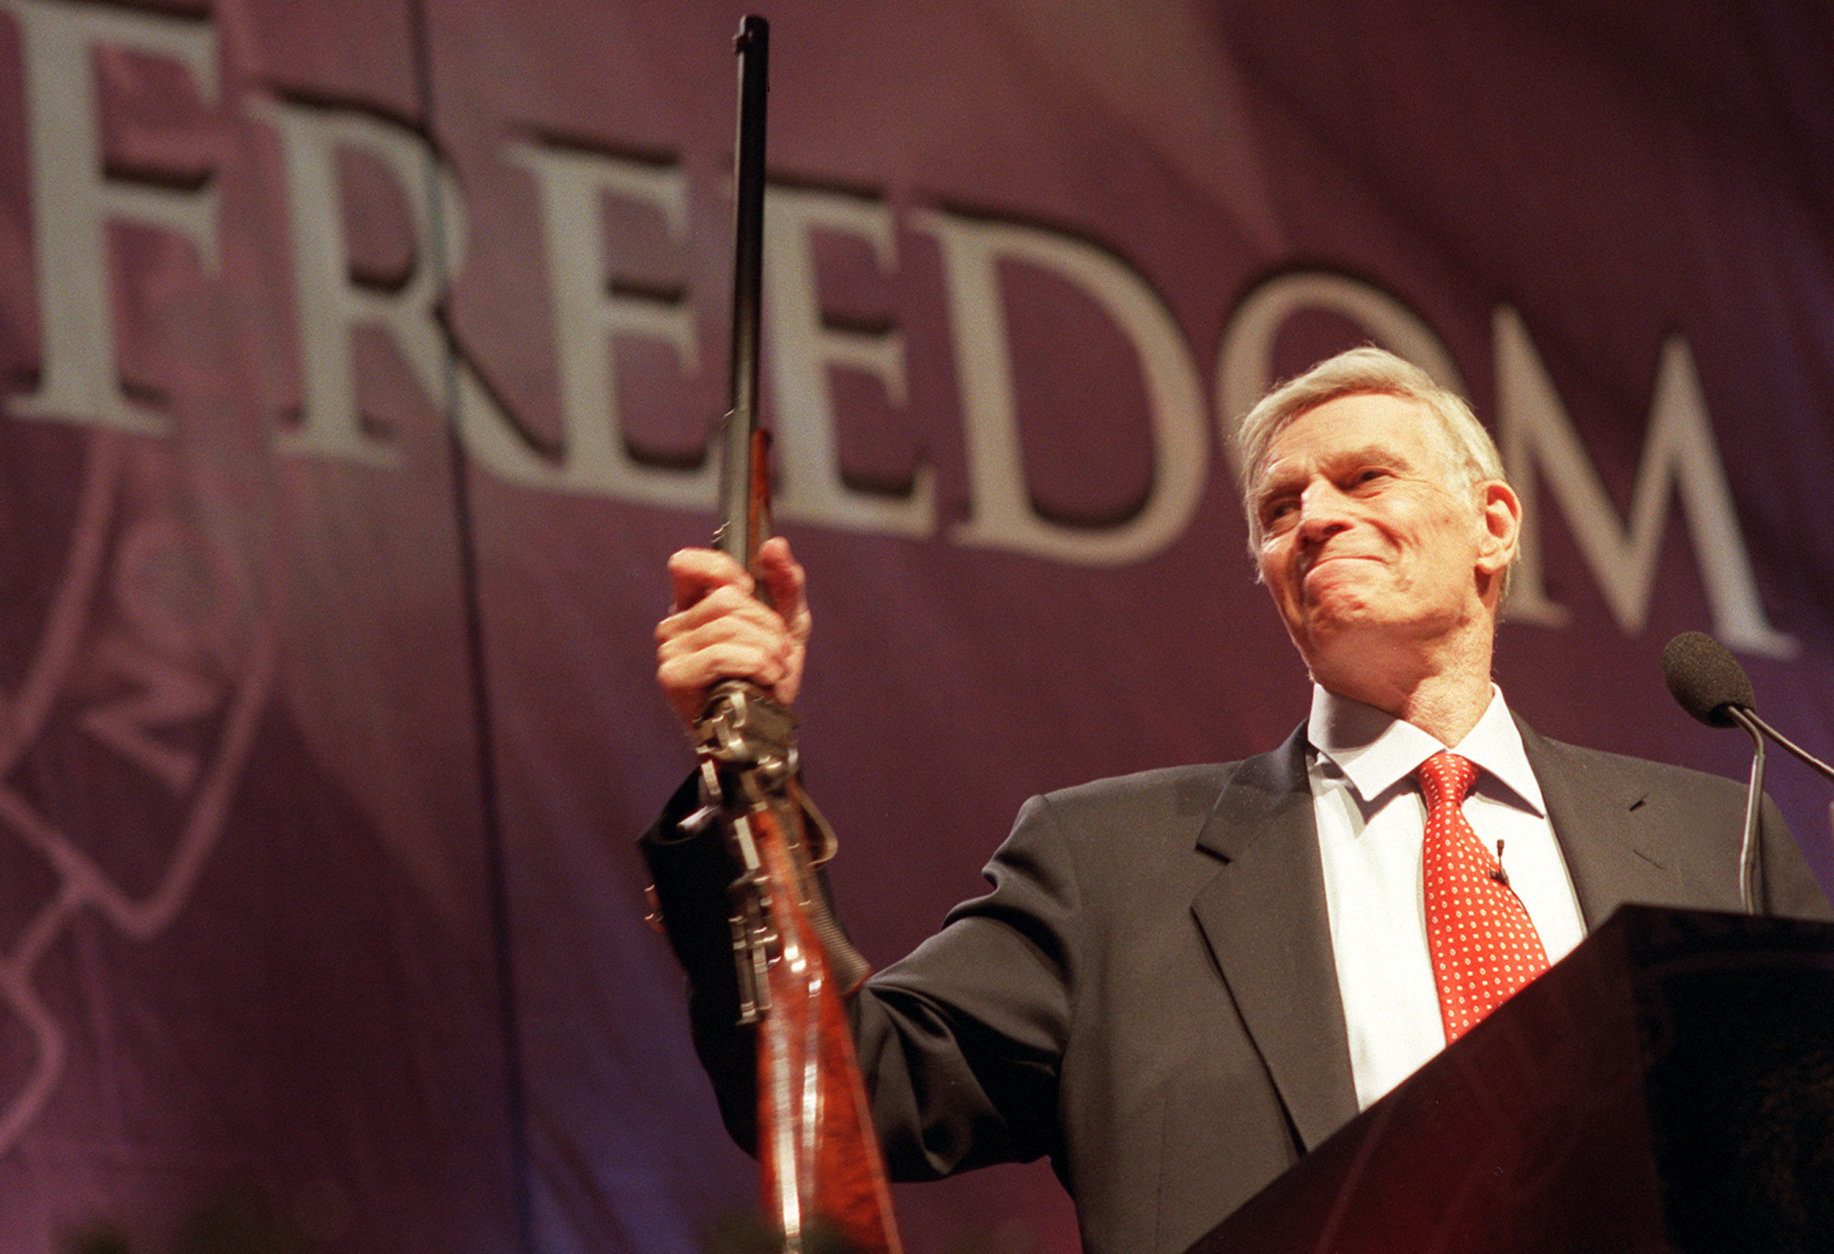 National Rifle Association (NRA) President Charlton Heston holds up a rifle during his address at the 131st NRA convention at the Reno-Sparks Convention Center in Reno, Nevada, April 27, 2002. Heston announced that he would remain president of the NRA for an unprecedented fifth term. (Photo by Candice Towell/Getty Images)